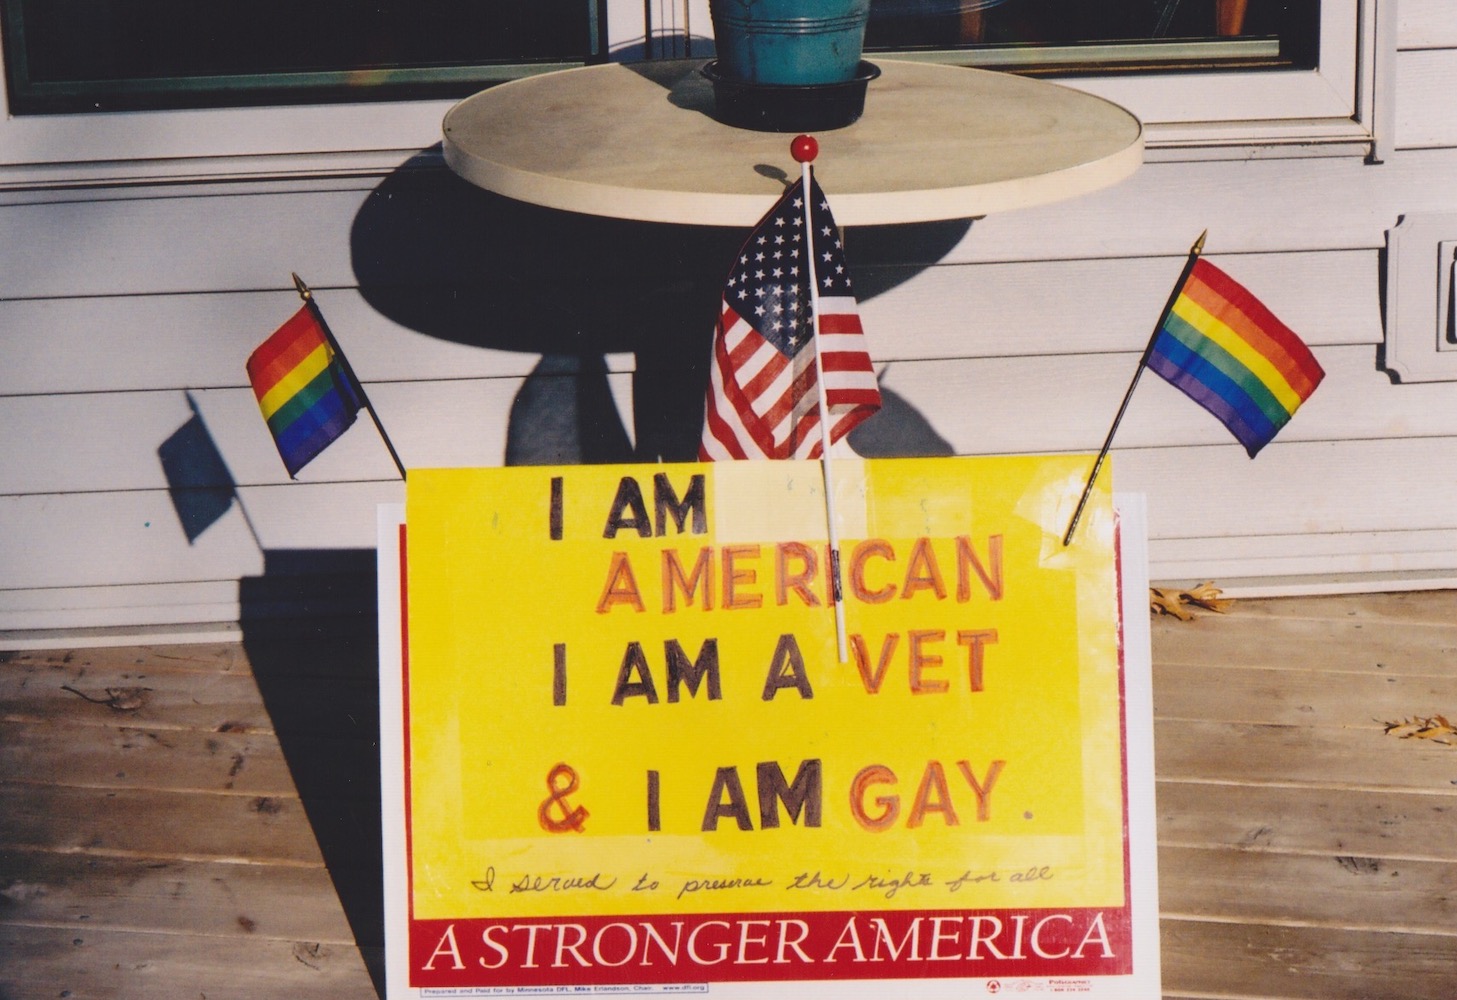 One of Don’s signs, that was carried to a Lobby Day, reads, “I Am American, I Am a Vet, and I Am Gay. I served to preserve the rights for all.” The sign’s border says, “A Stronger America” and has two pride flags and an American flag taped to it. Photo courtesy of Don Quaintance. 